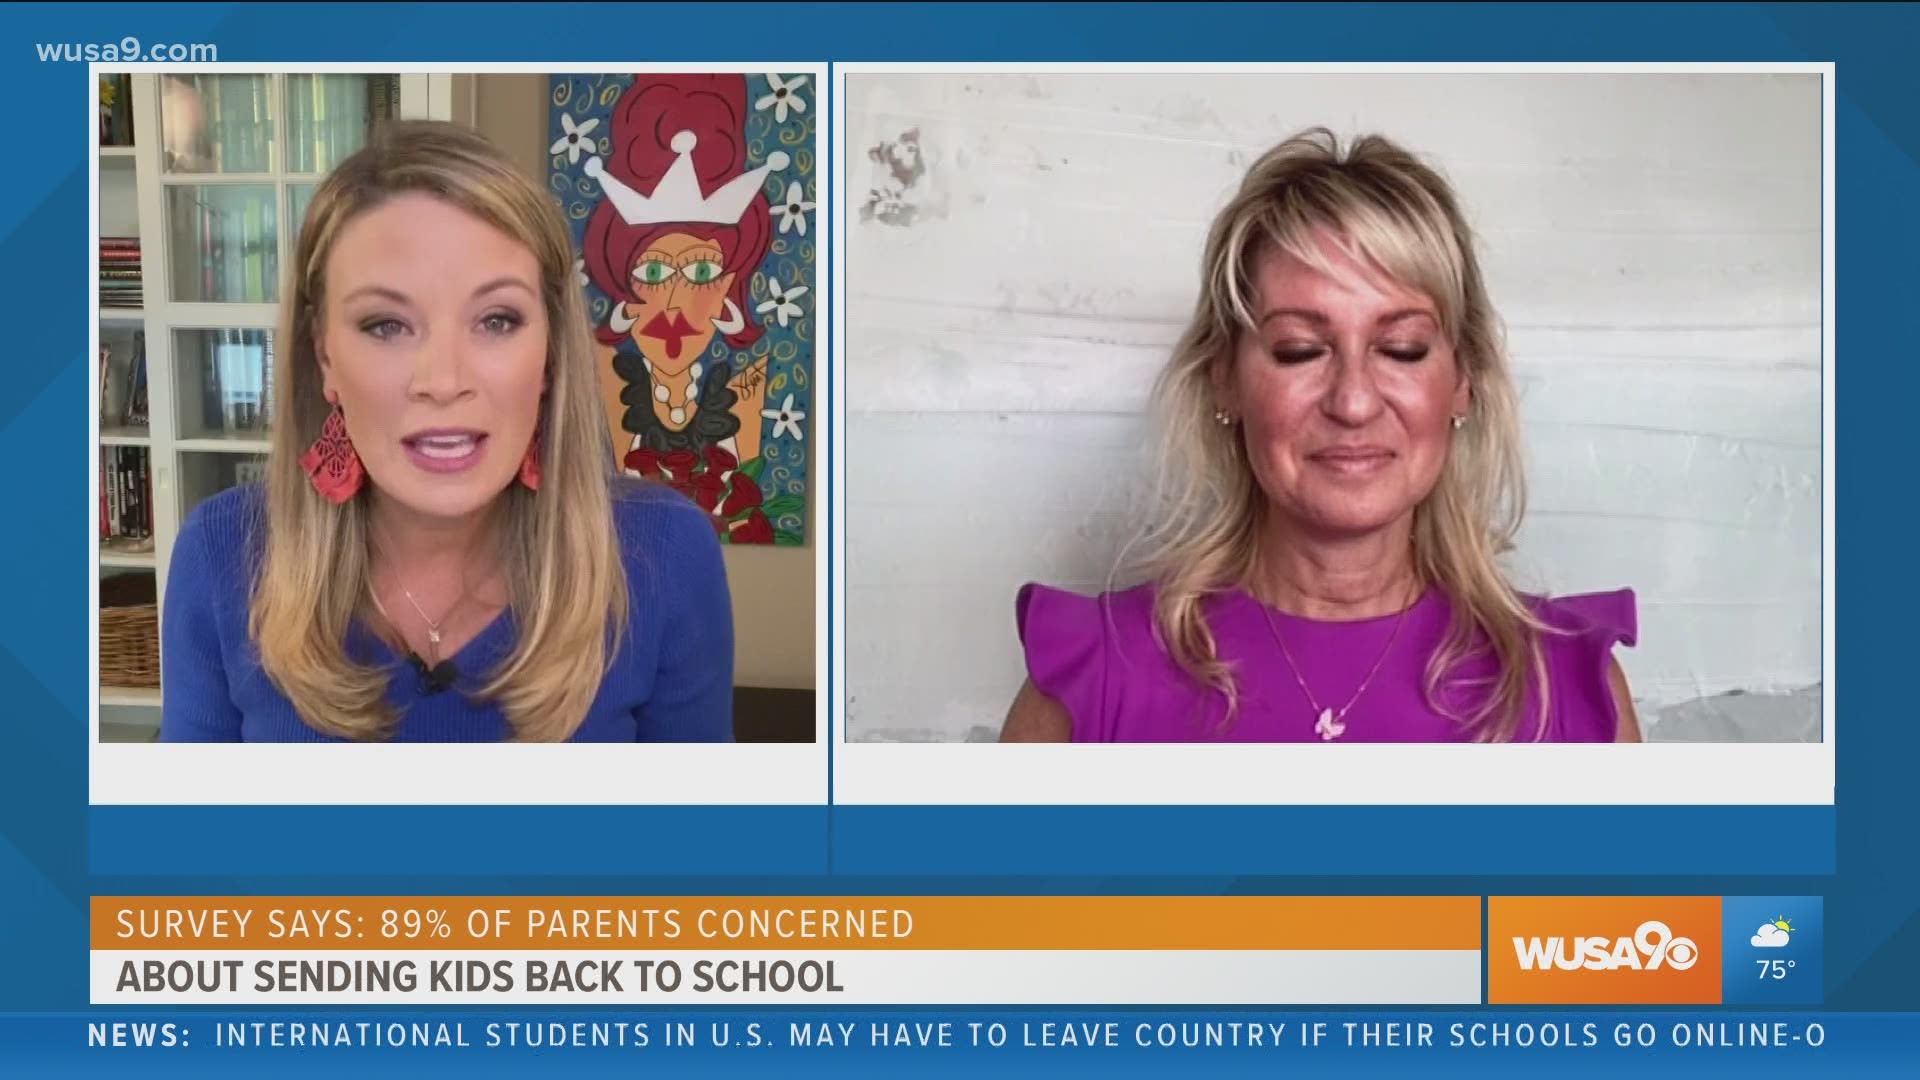 Parenting expert, Eirene Heidelberger shares some tips on how to decide if you should send your children back into the classroom.